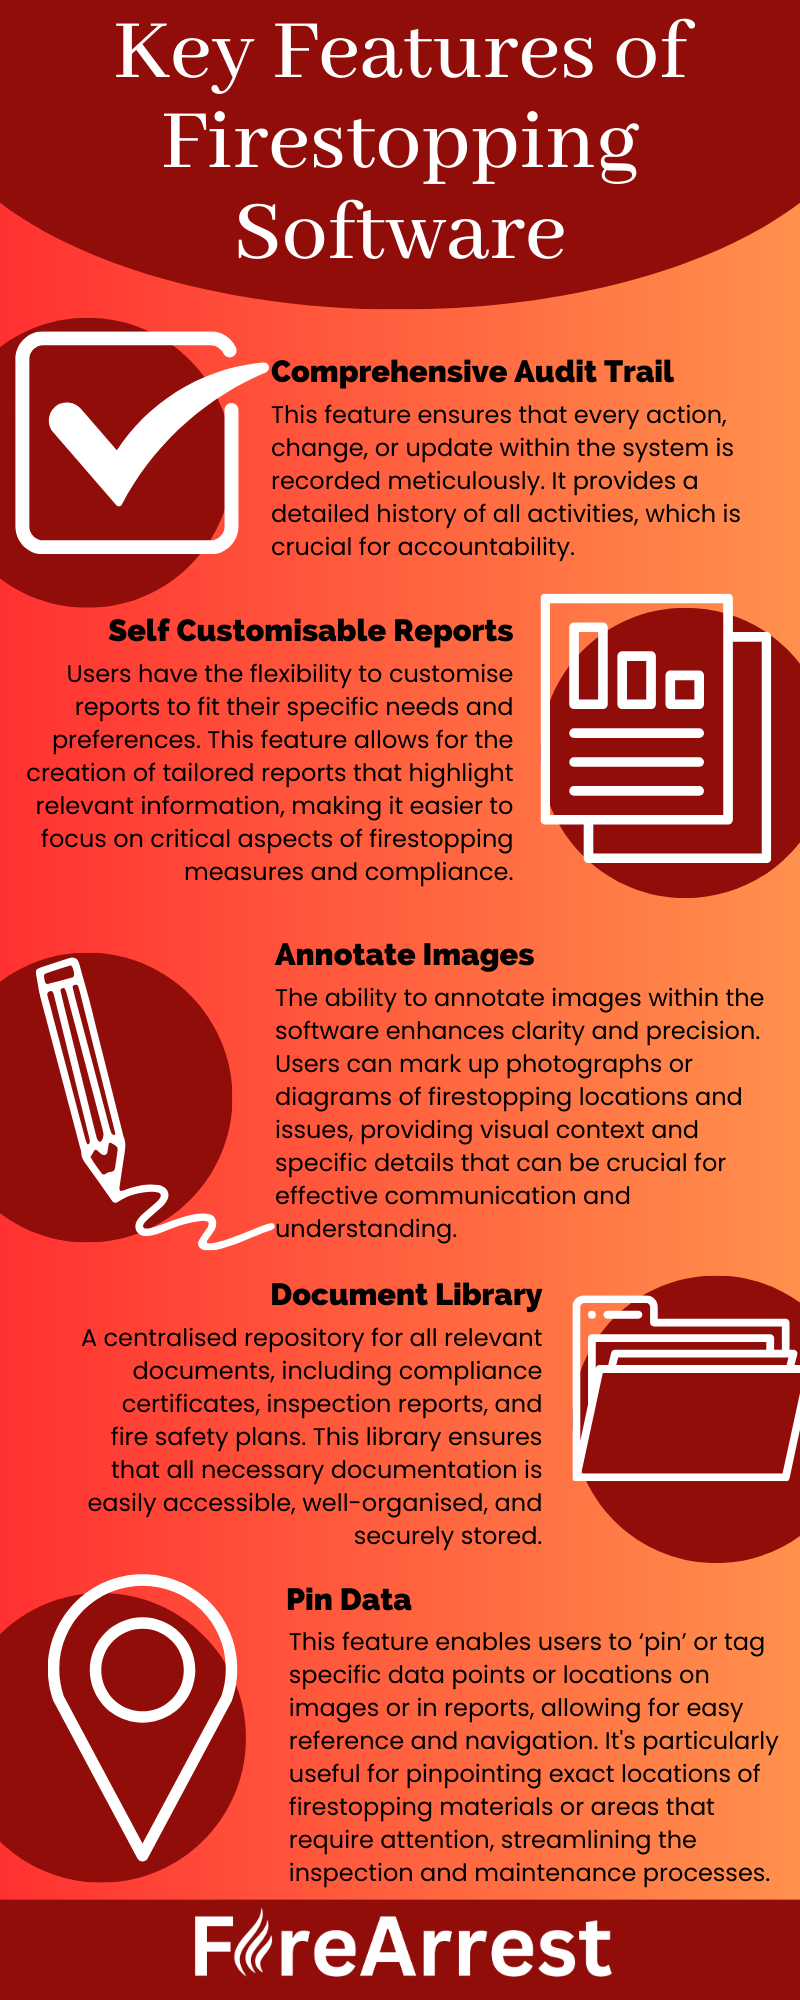 Key Features of Firestopping Software Infographic